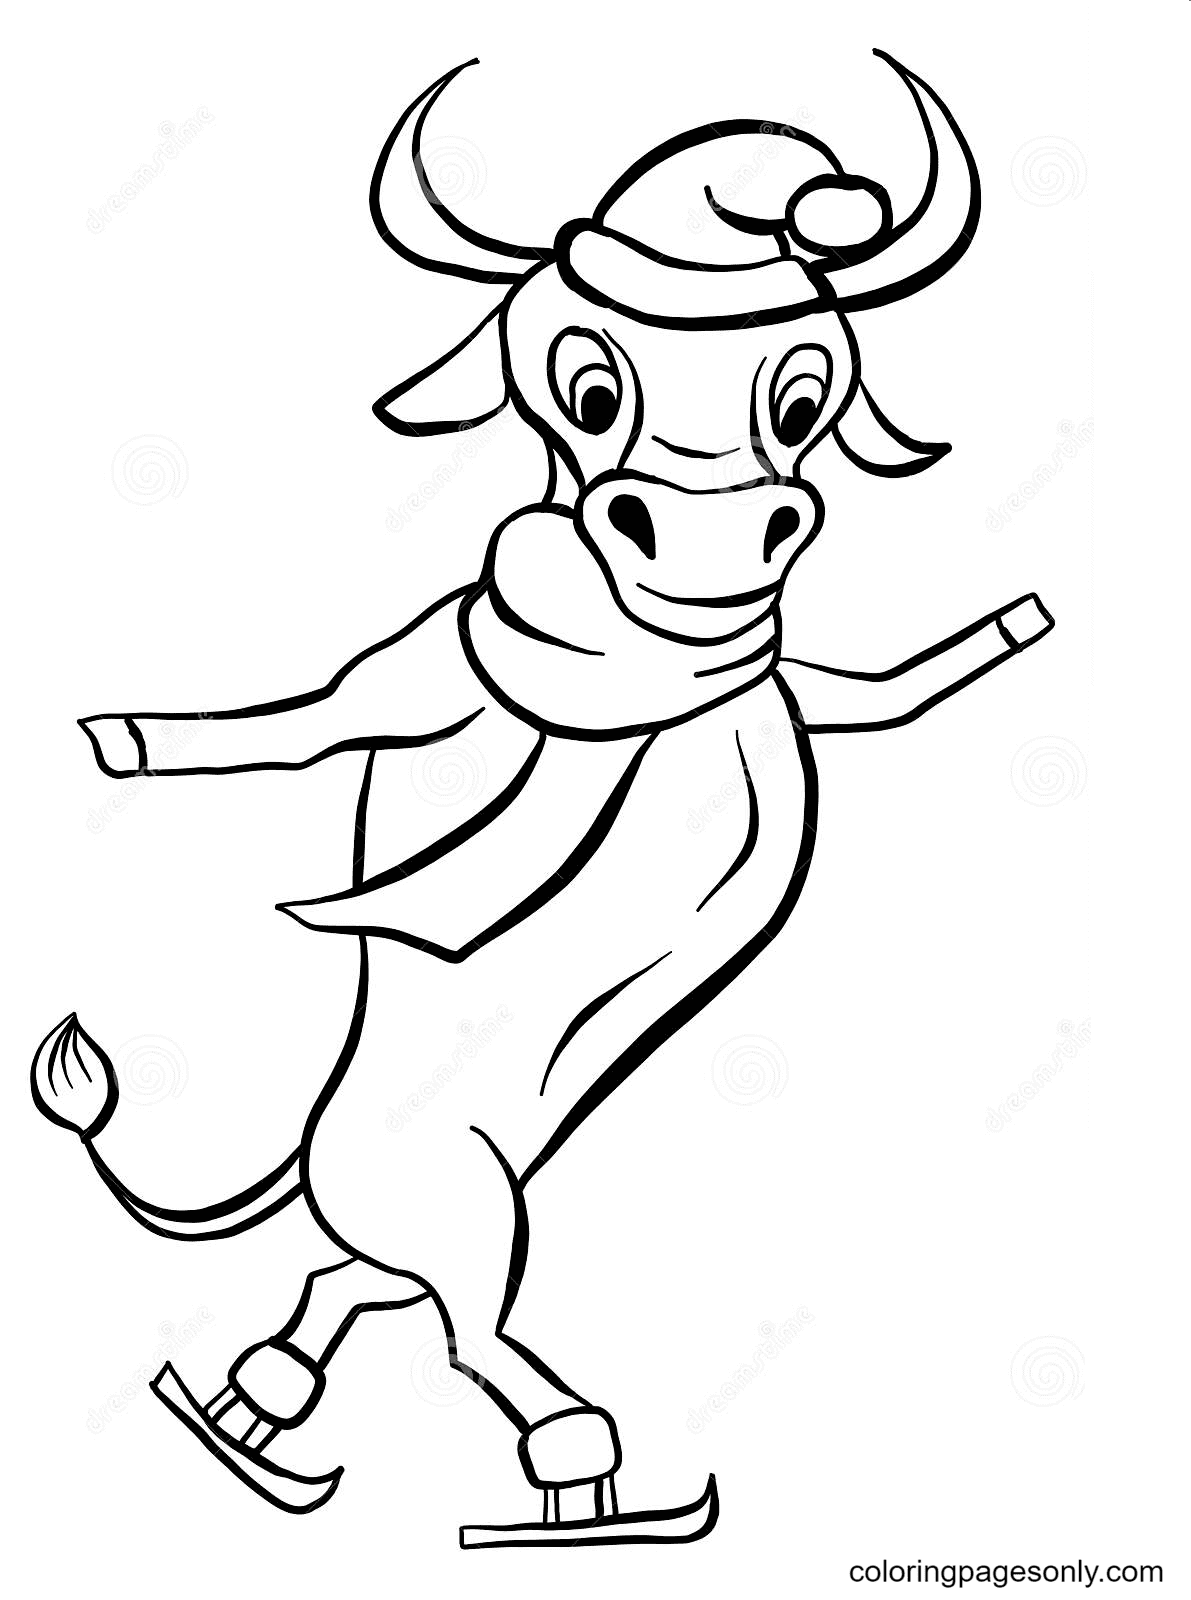 Skating Cow Coloring Pages